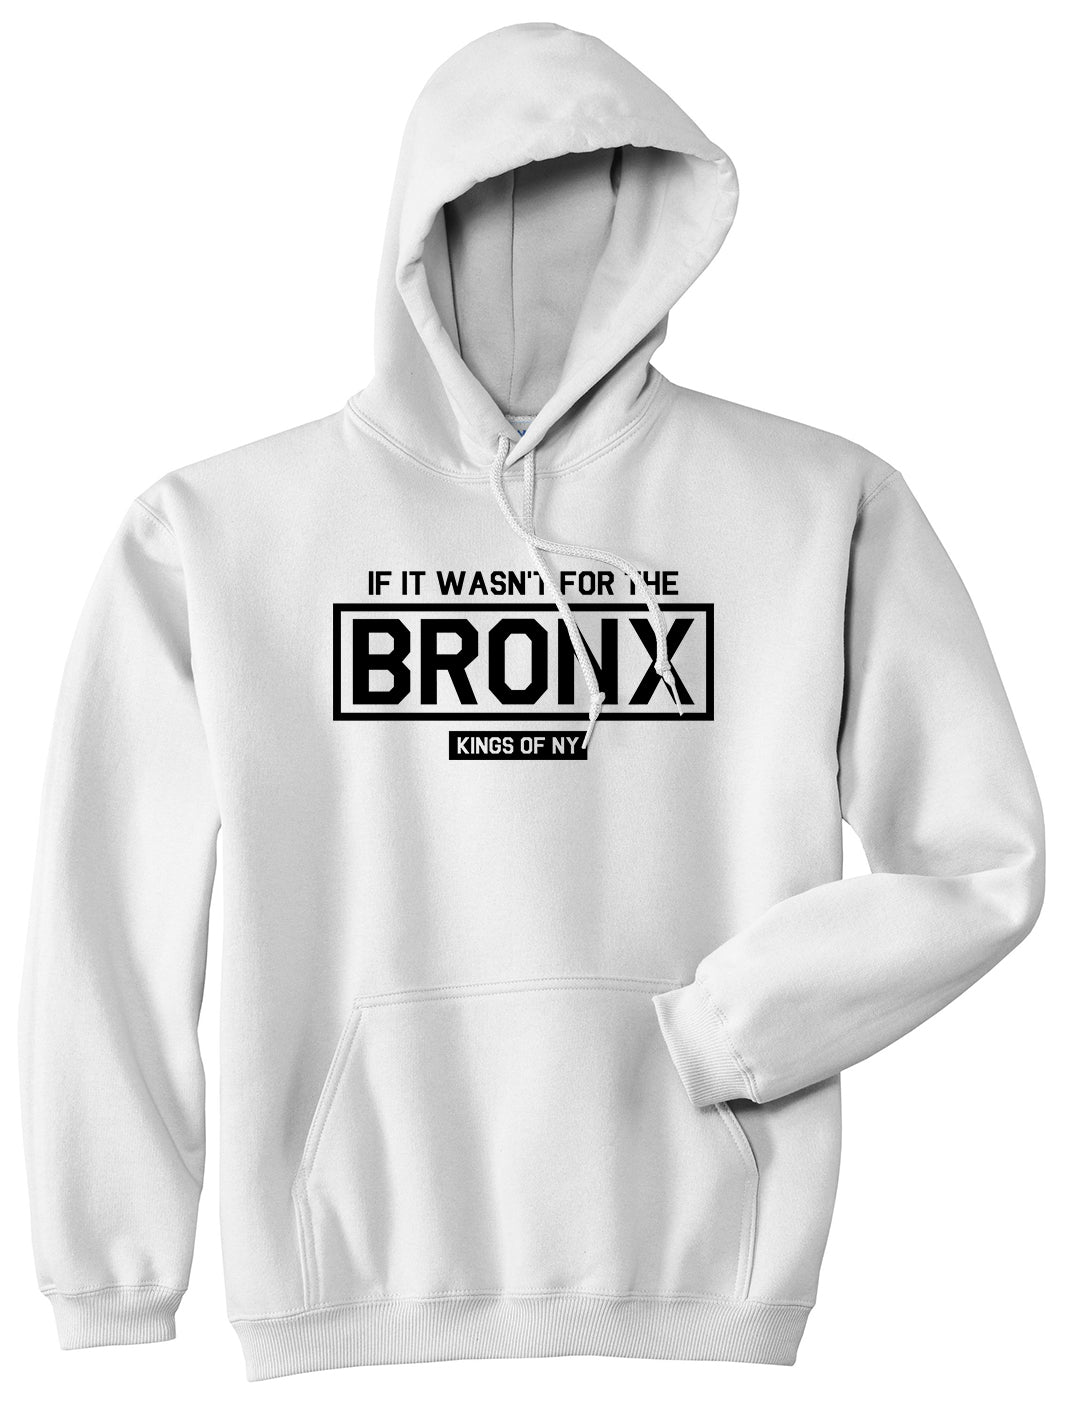 If It Wasnt For The Bronx Mens Pullover Hoodie White by Kings Of NY